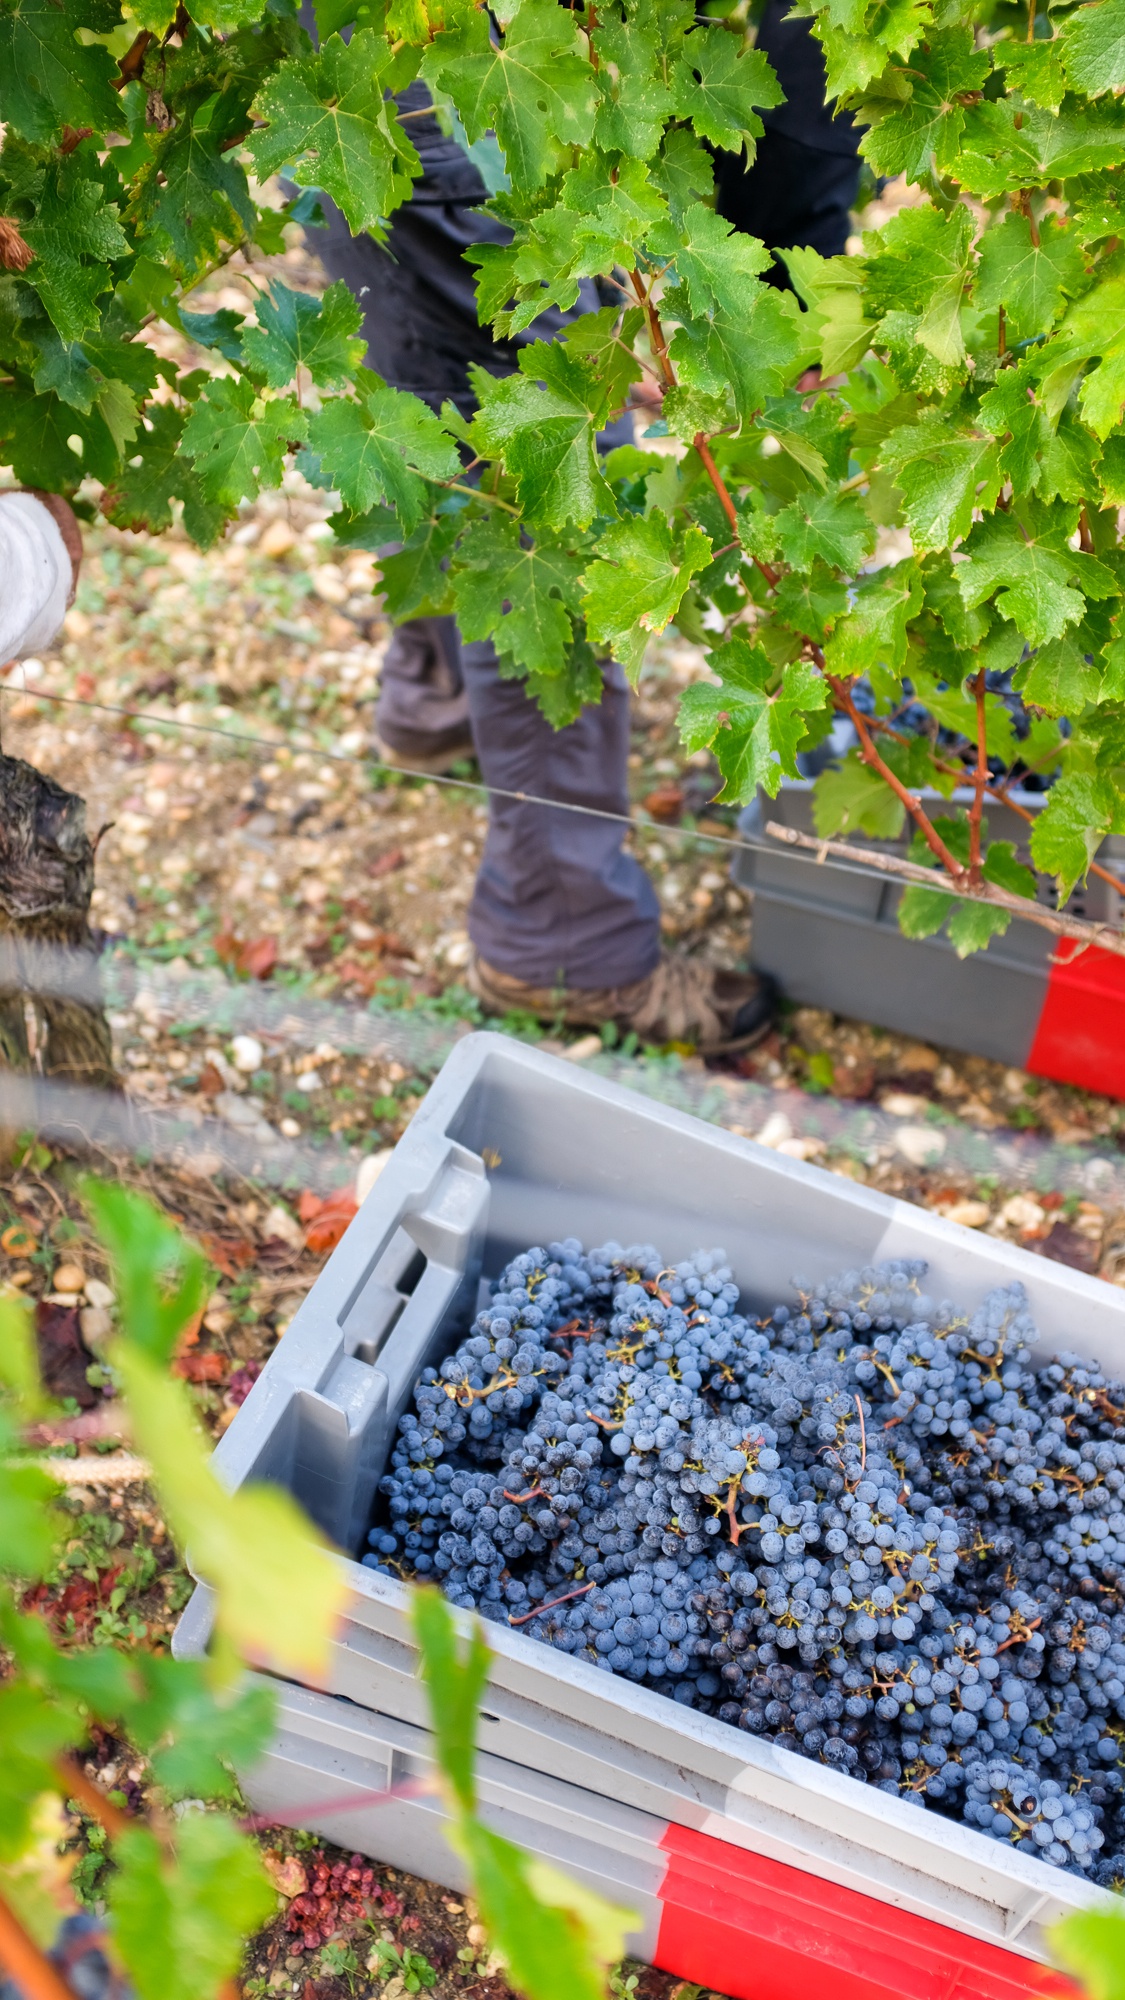 Can Viticulture Offer A Solution for Marginalised People? - Chateau Pedesclaux